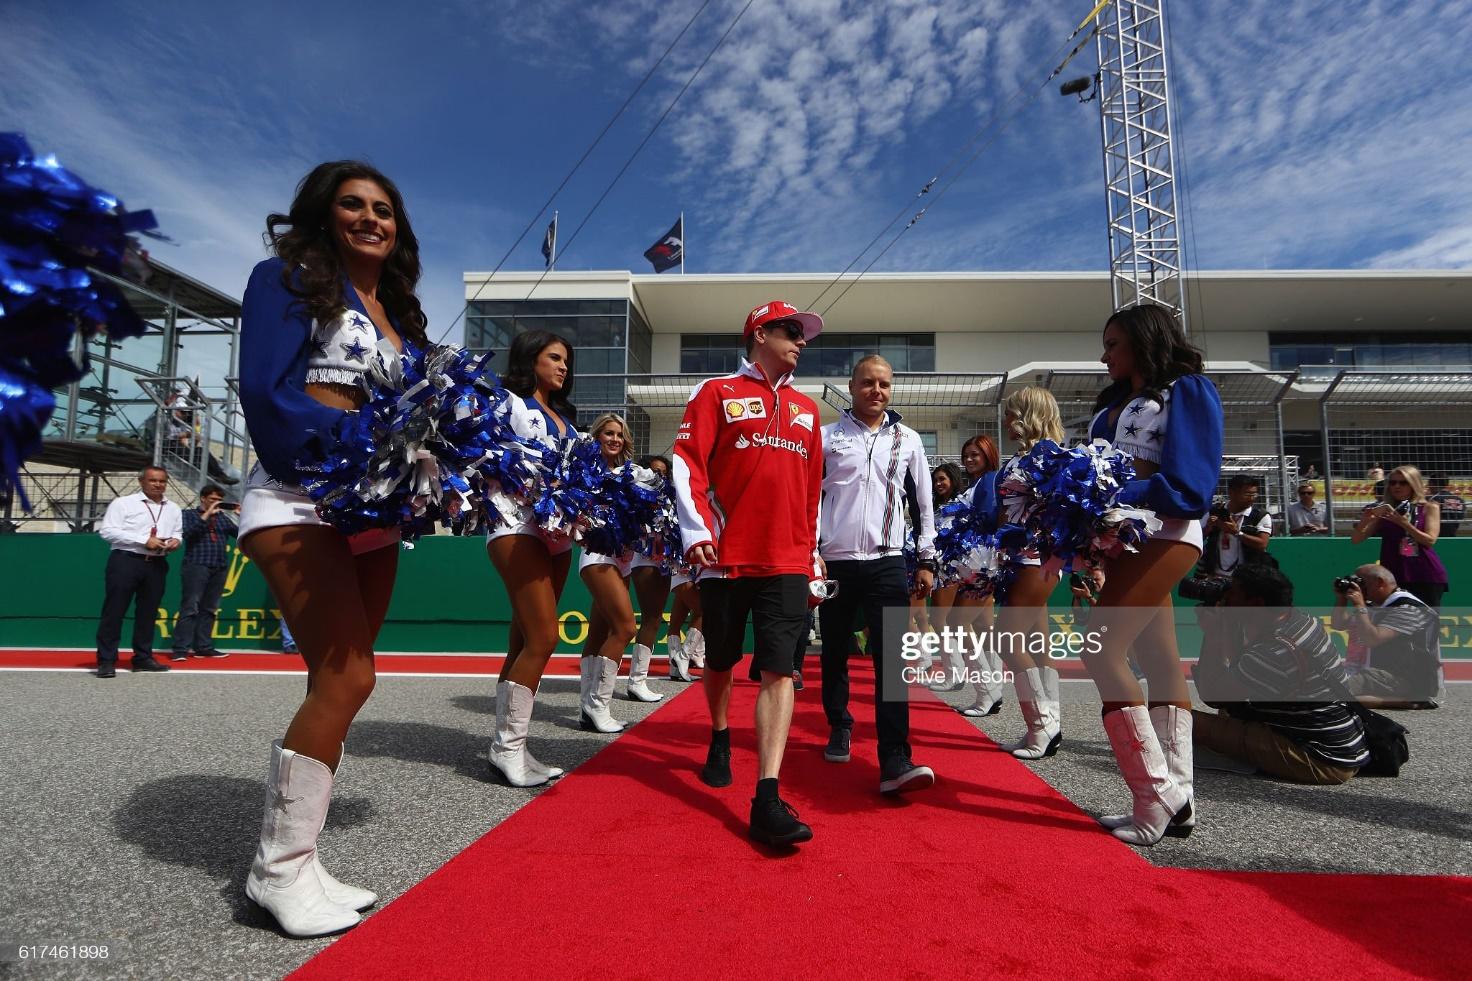 Kimi Raikkonen, Ferrari and Valtteri Bottas, Williams, walk to the drivers parade before the United States Formula One Grand Prix at Circuit of The Americas on October 23, 2016 in Austin, United States.